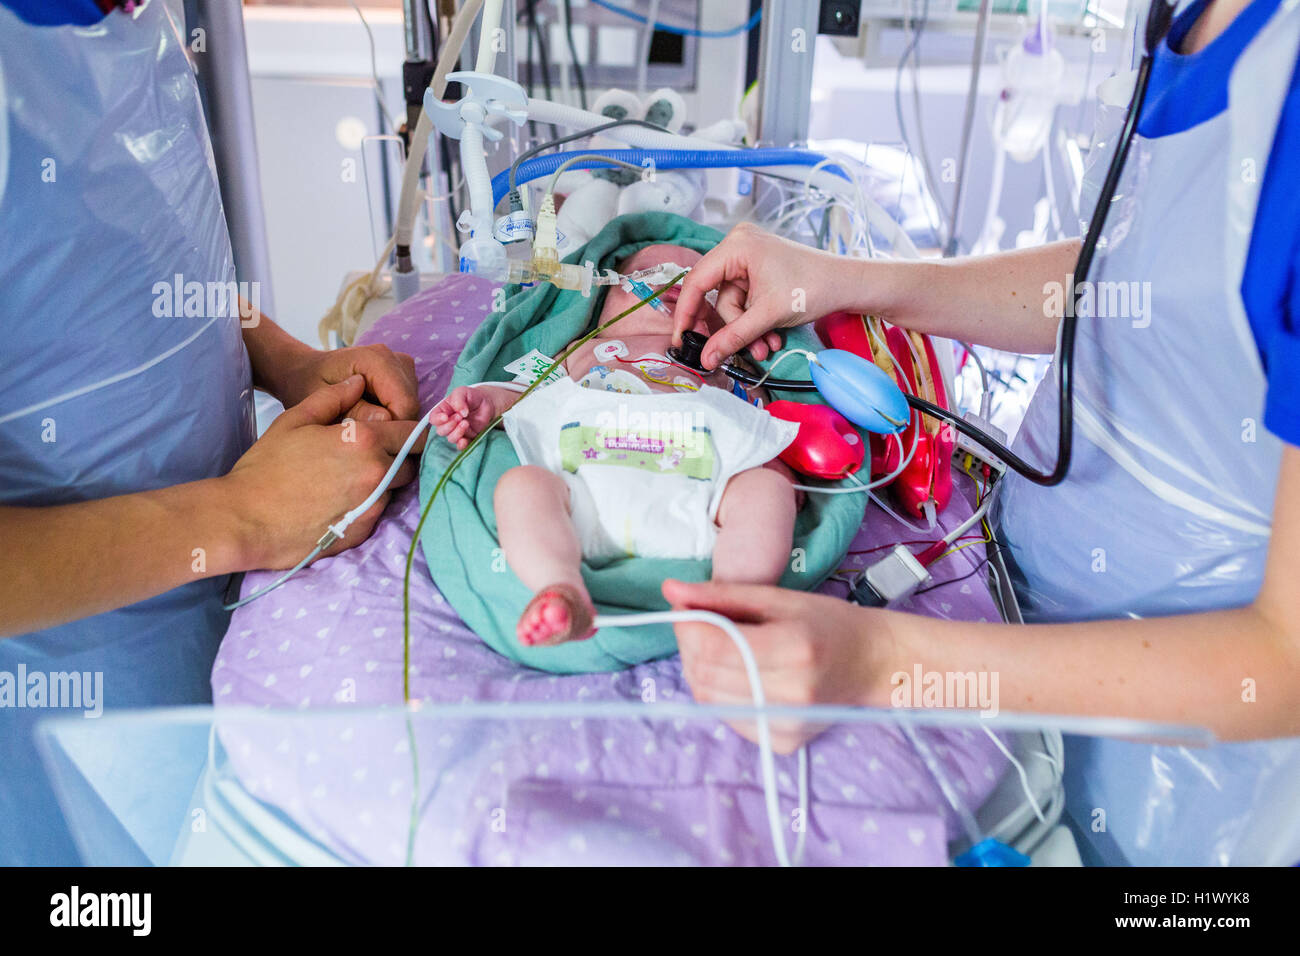 Newborn baby placed under respiratory assistance. Stock Photo